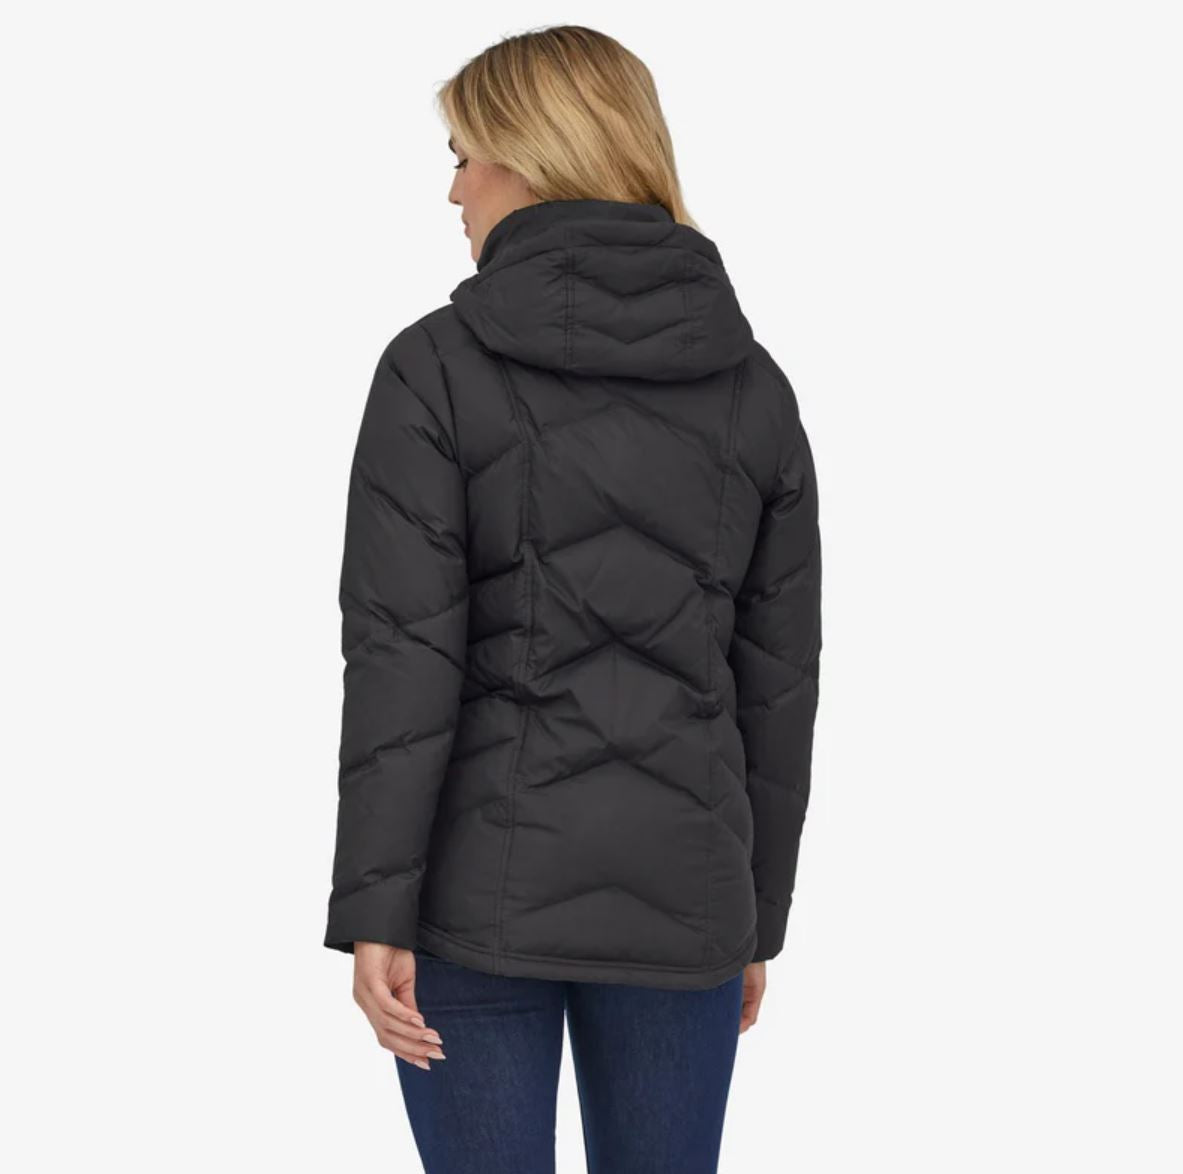 patagonia womens down with it jacket in black, back view on a model